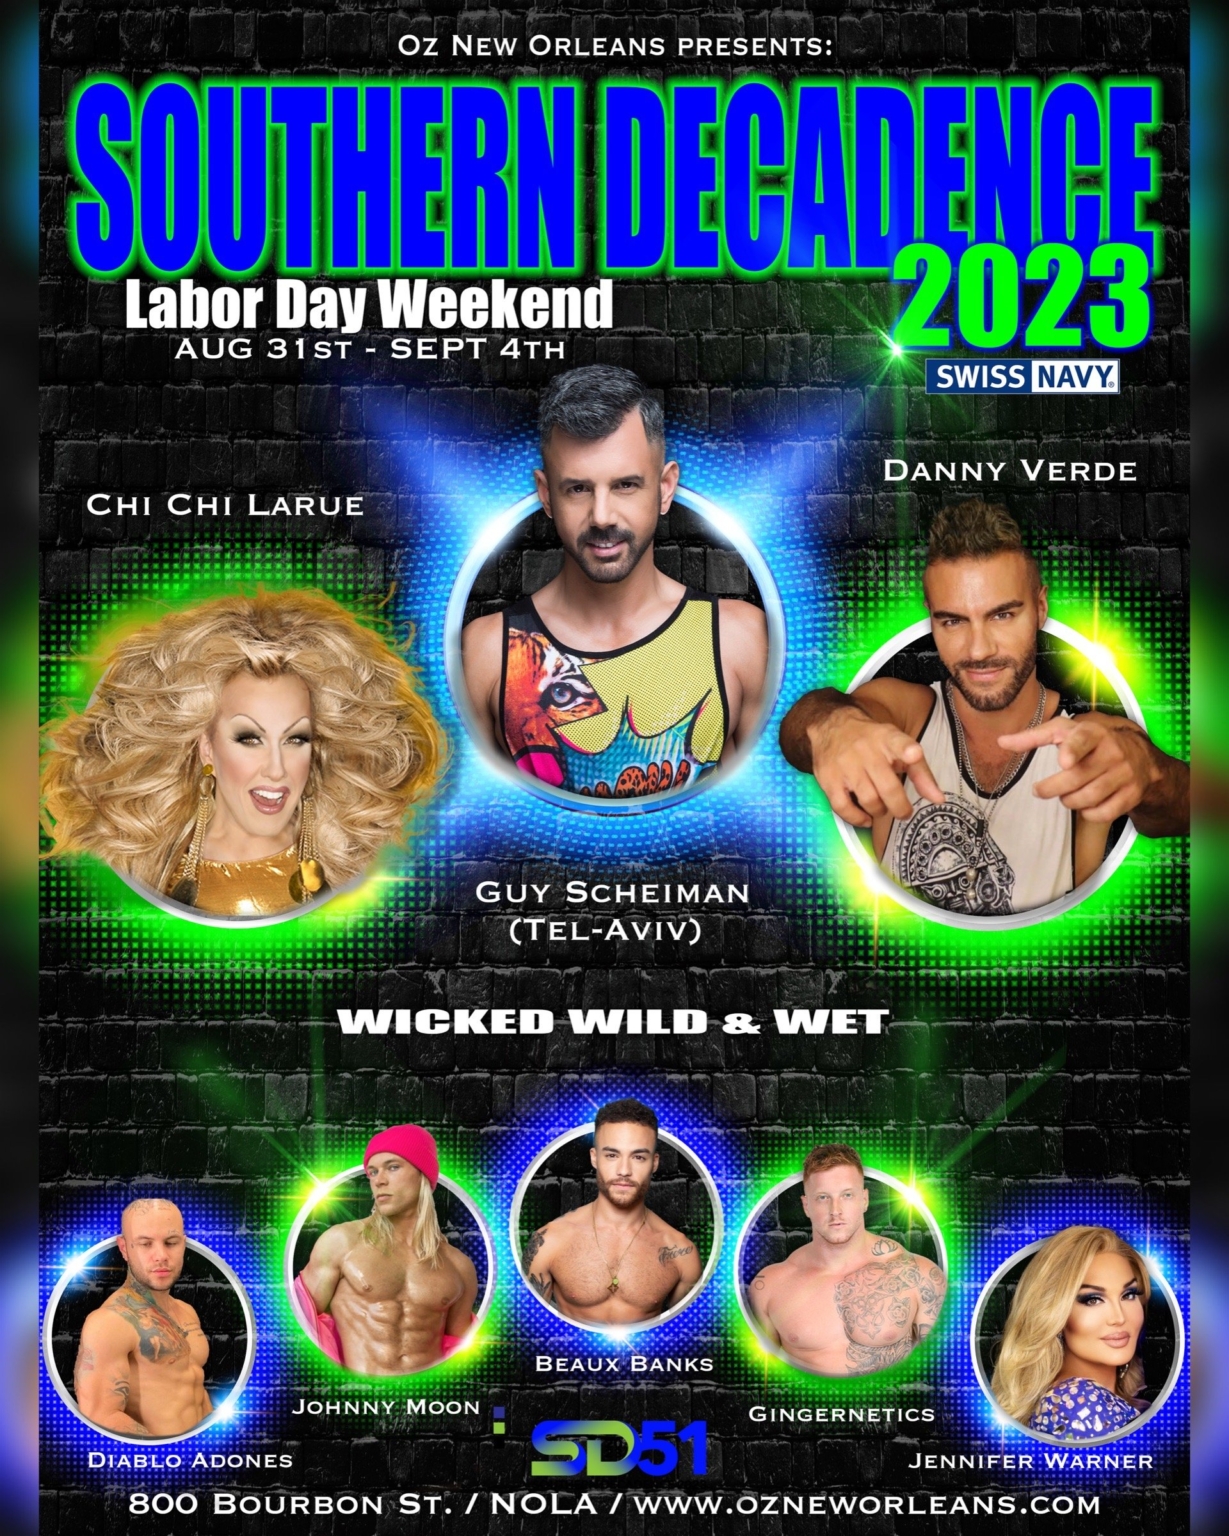 Oz New Orleans Southern Decadence 2023 Weekend (VIP Pass) Official